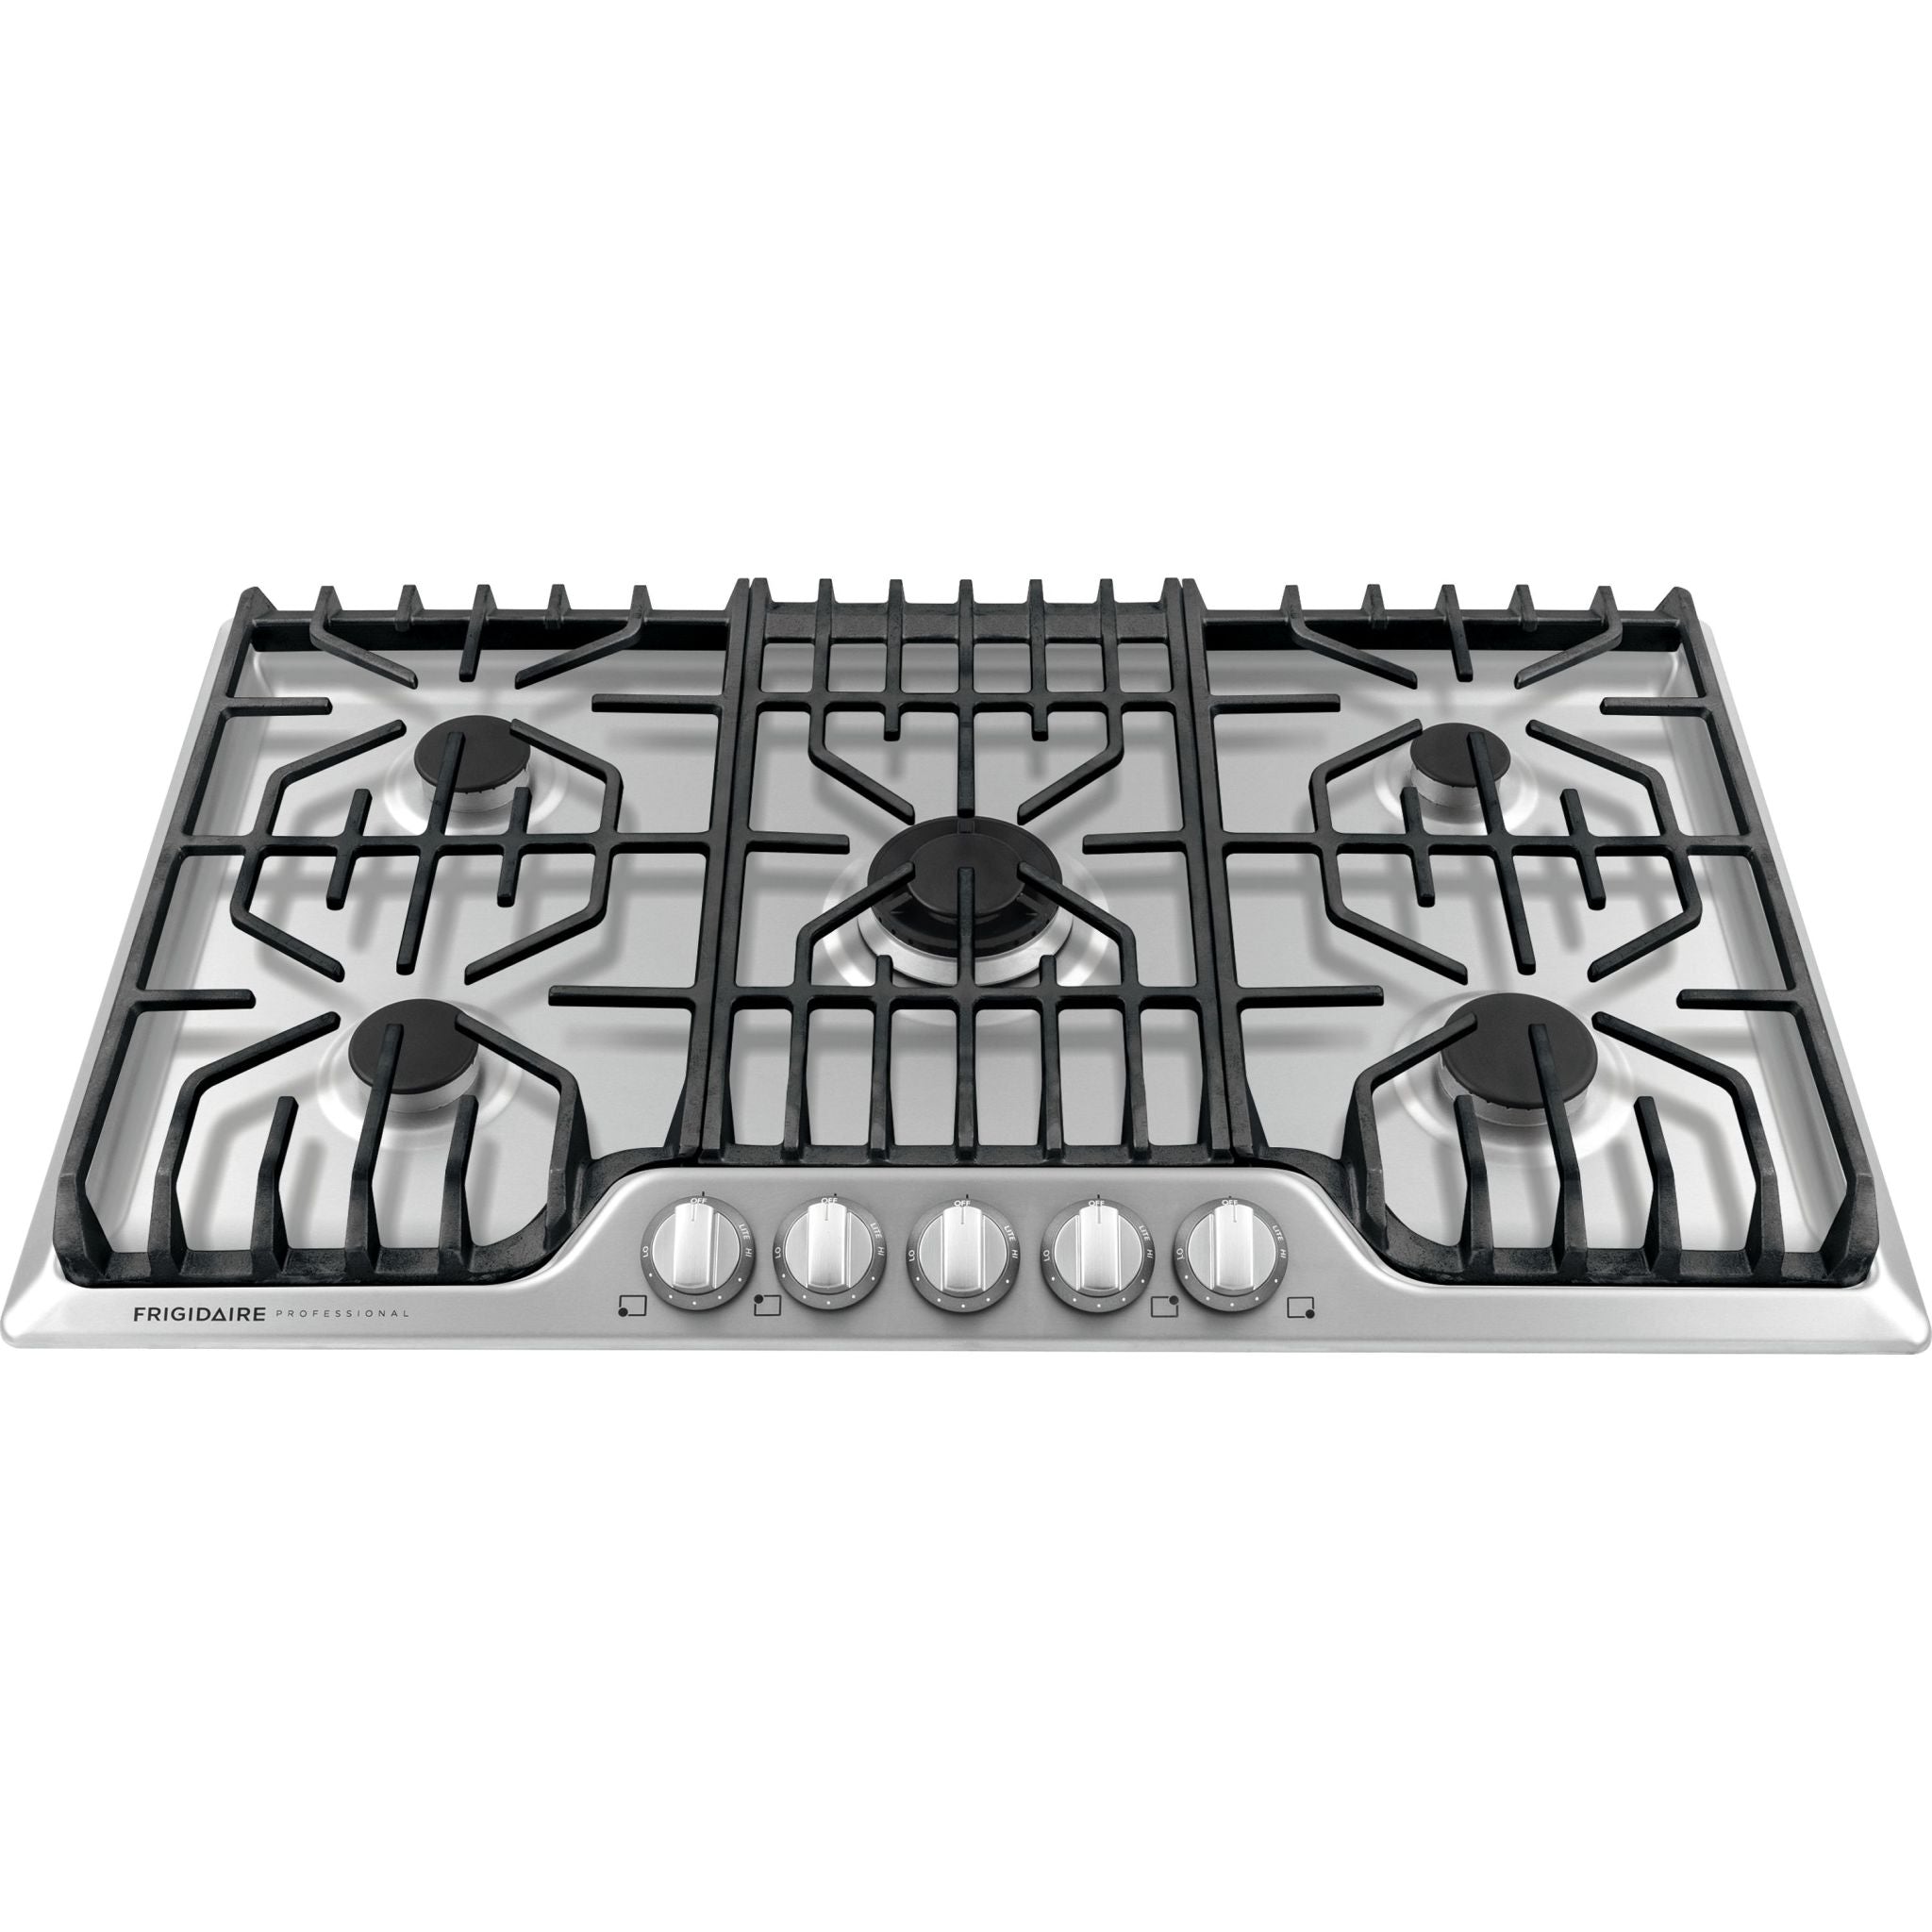 Frigidaire Professional, Frigidaire Professional 36" Gas Cooktop (FPGC3677RS) - Stainless Steel